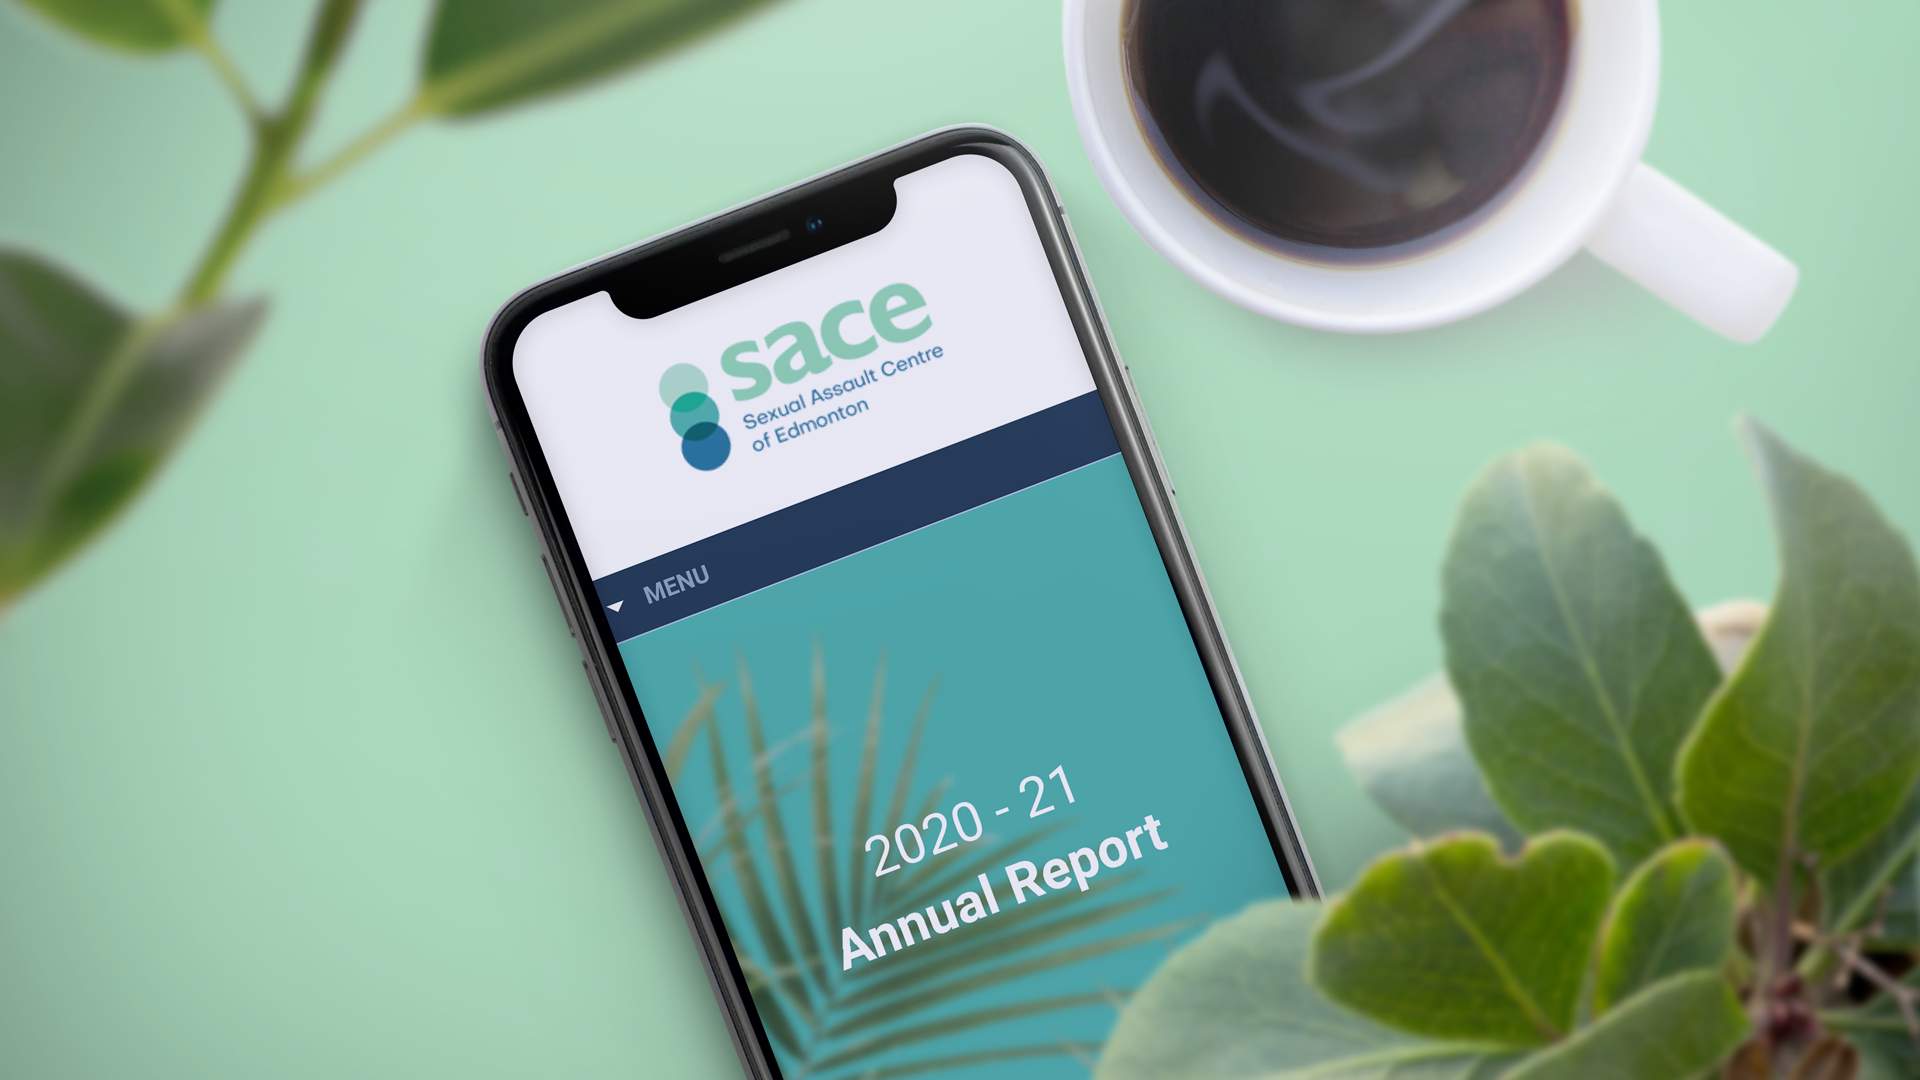 A cell phone displaying the 2020-2021 Annual Report from the SACE website on a mint green background, plants and a cup of coffee.